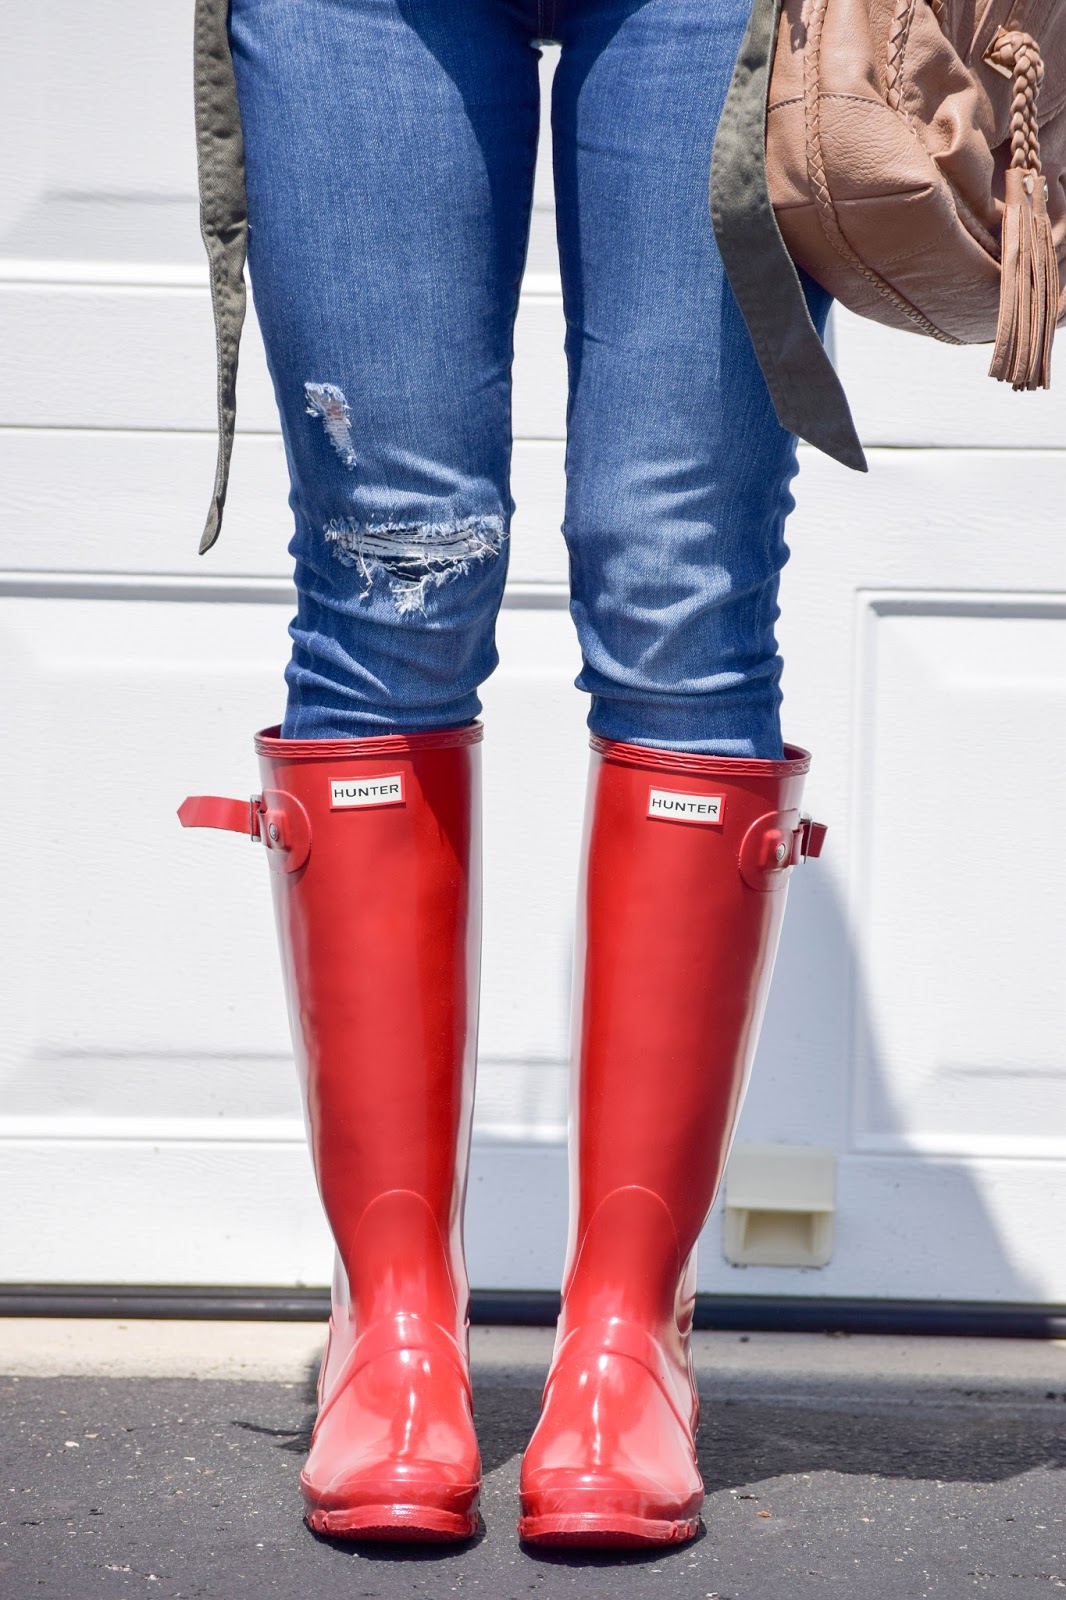 Green Jacket + Red Rain Boots | Style & Sequins